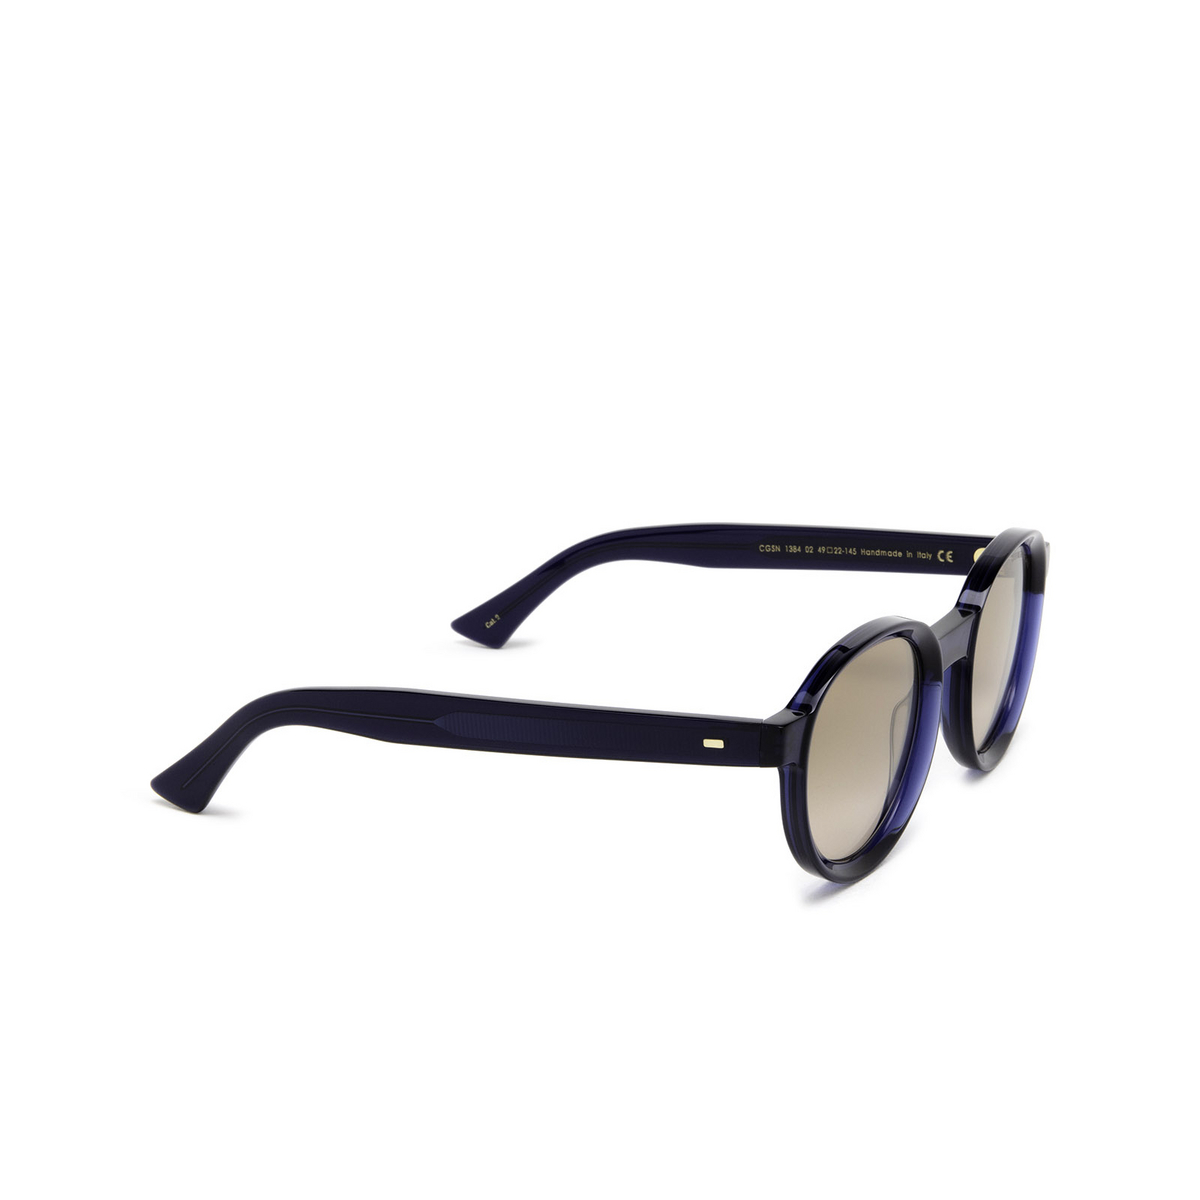 Cutler and Gross 1384 Sunglasses 02 Classic Navy Blue - three-quarters view